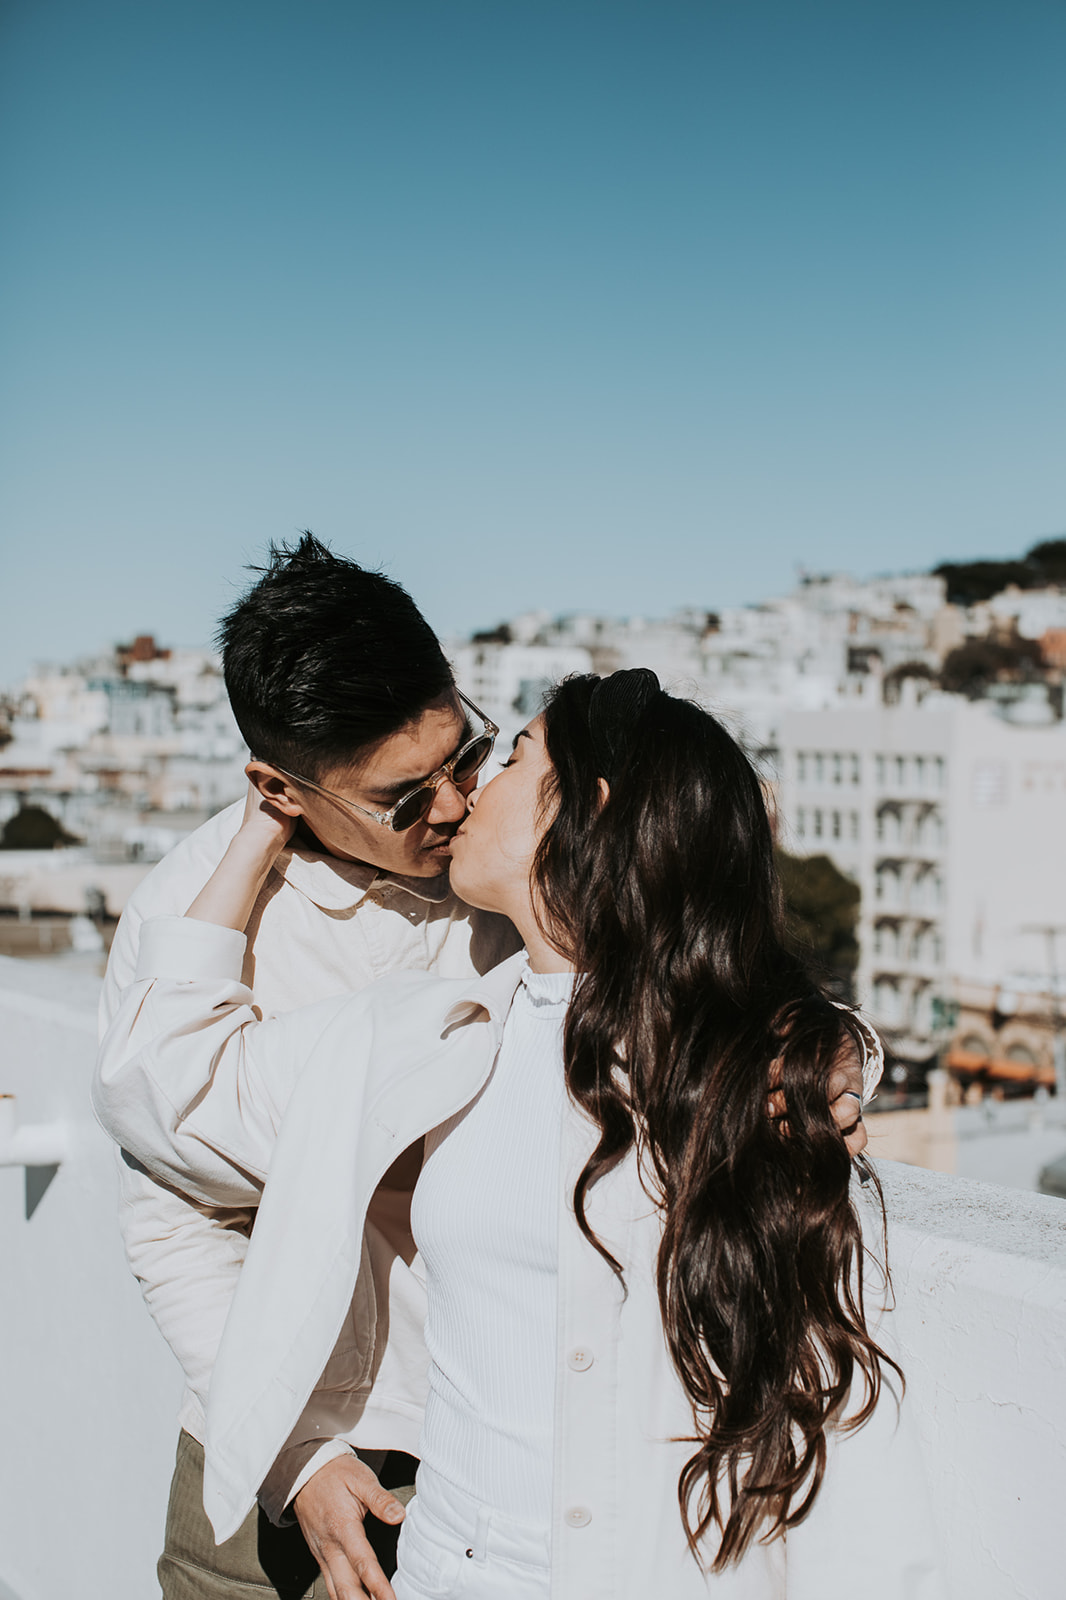 San Francisco Parking Garage couples session by Abigail Maki Photography. Includes posing inspiration for an outdoor couples session. Book your San Fransico couples session and browse the blog for more inspiration #couples #photography #couplesphotography #sanfranciscophotographer